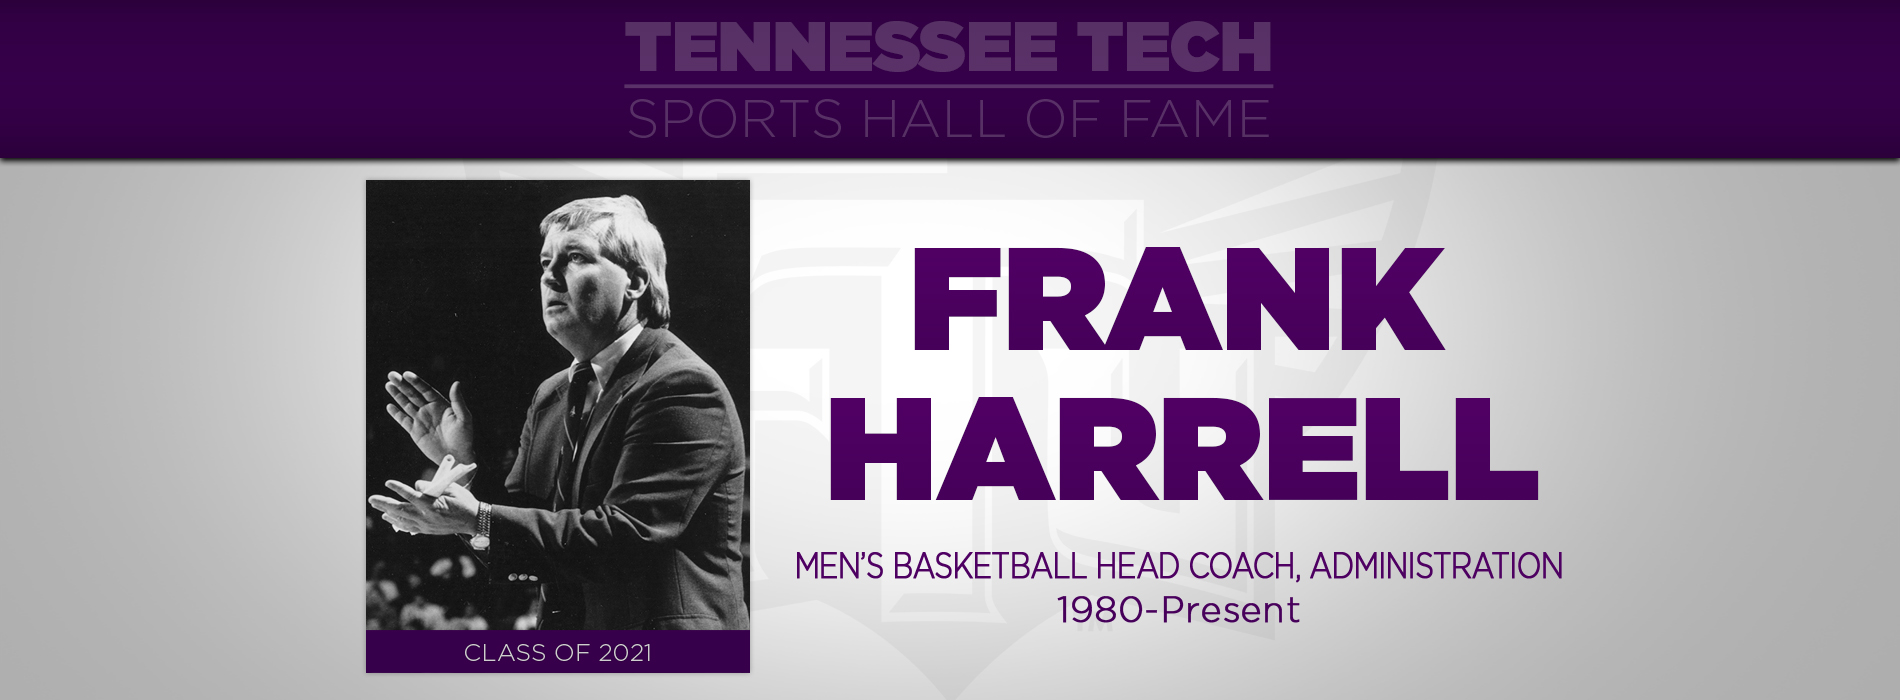 Harrell to be inducted into TTU Sports Hall of Fame Friday night